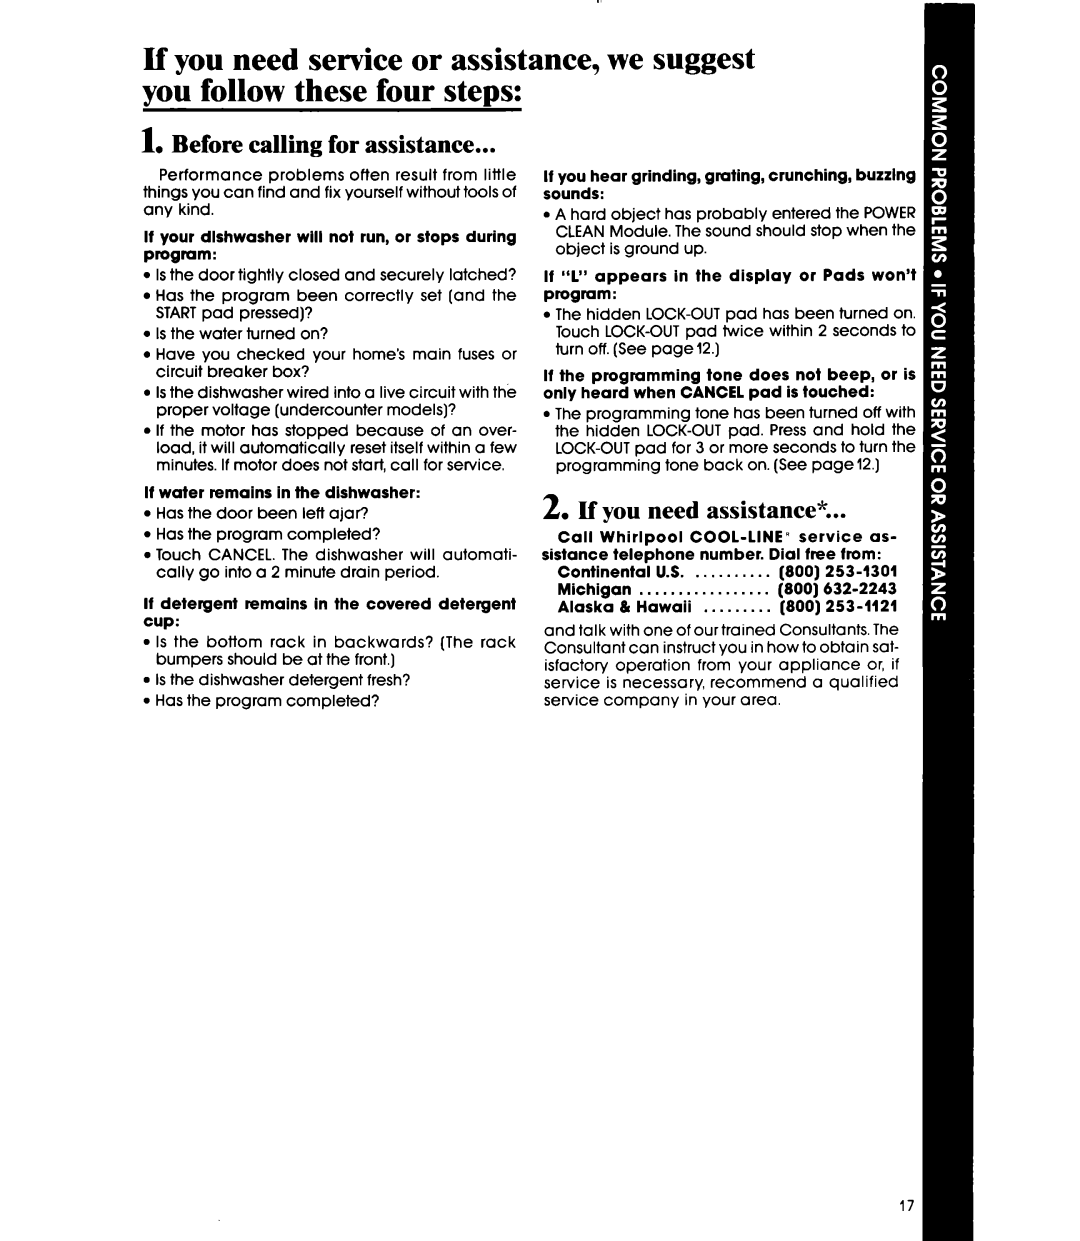 Whirlpool DU9700XR manual Before calling for assistance, If you need assistance 